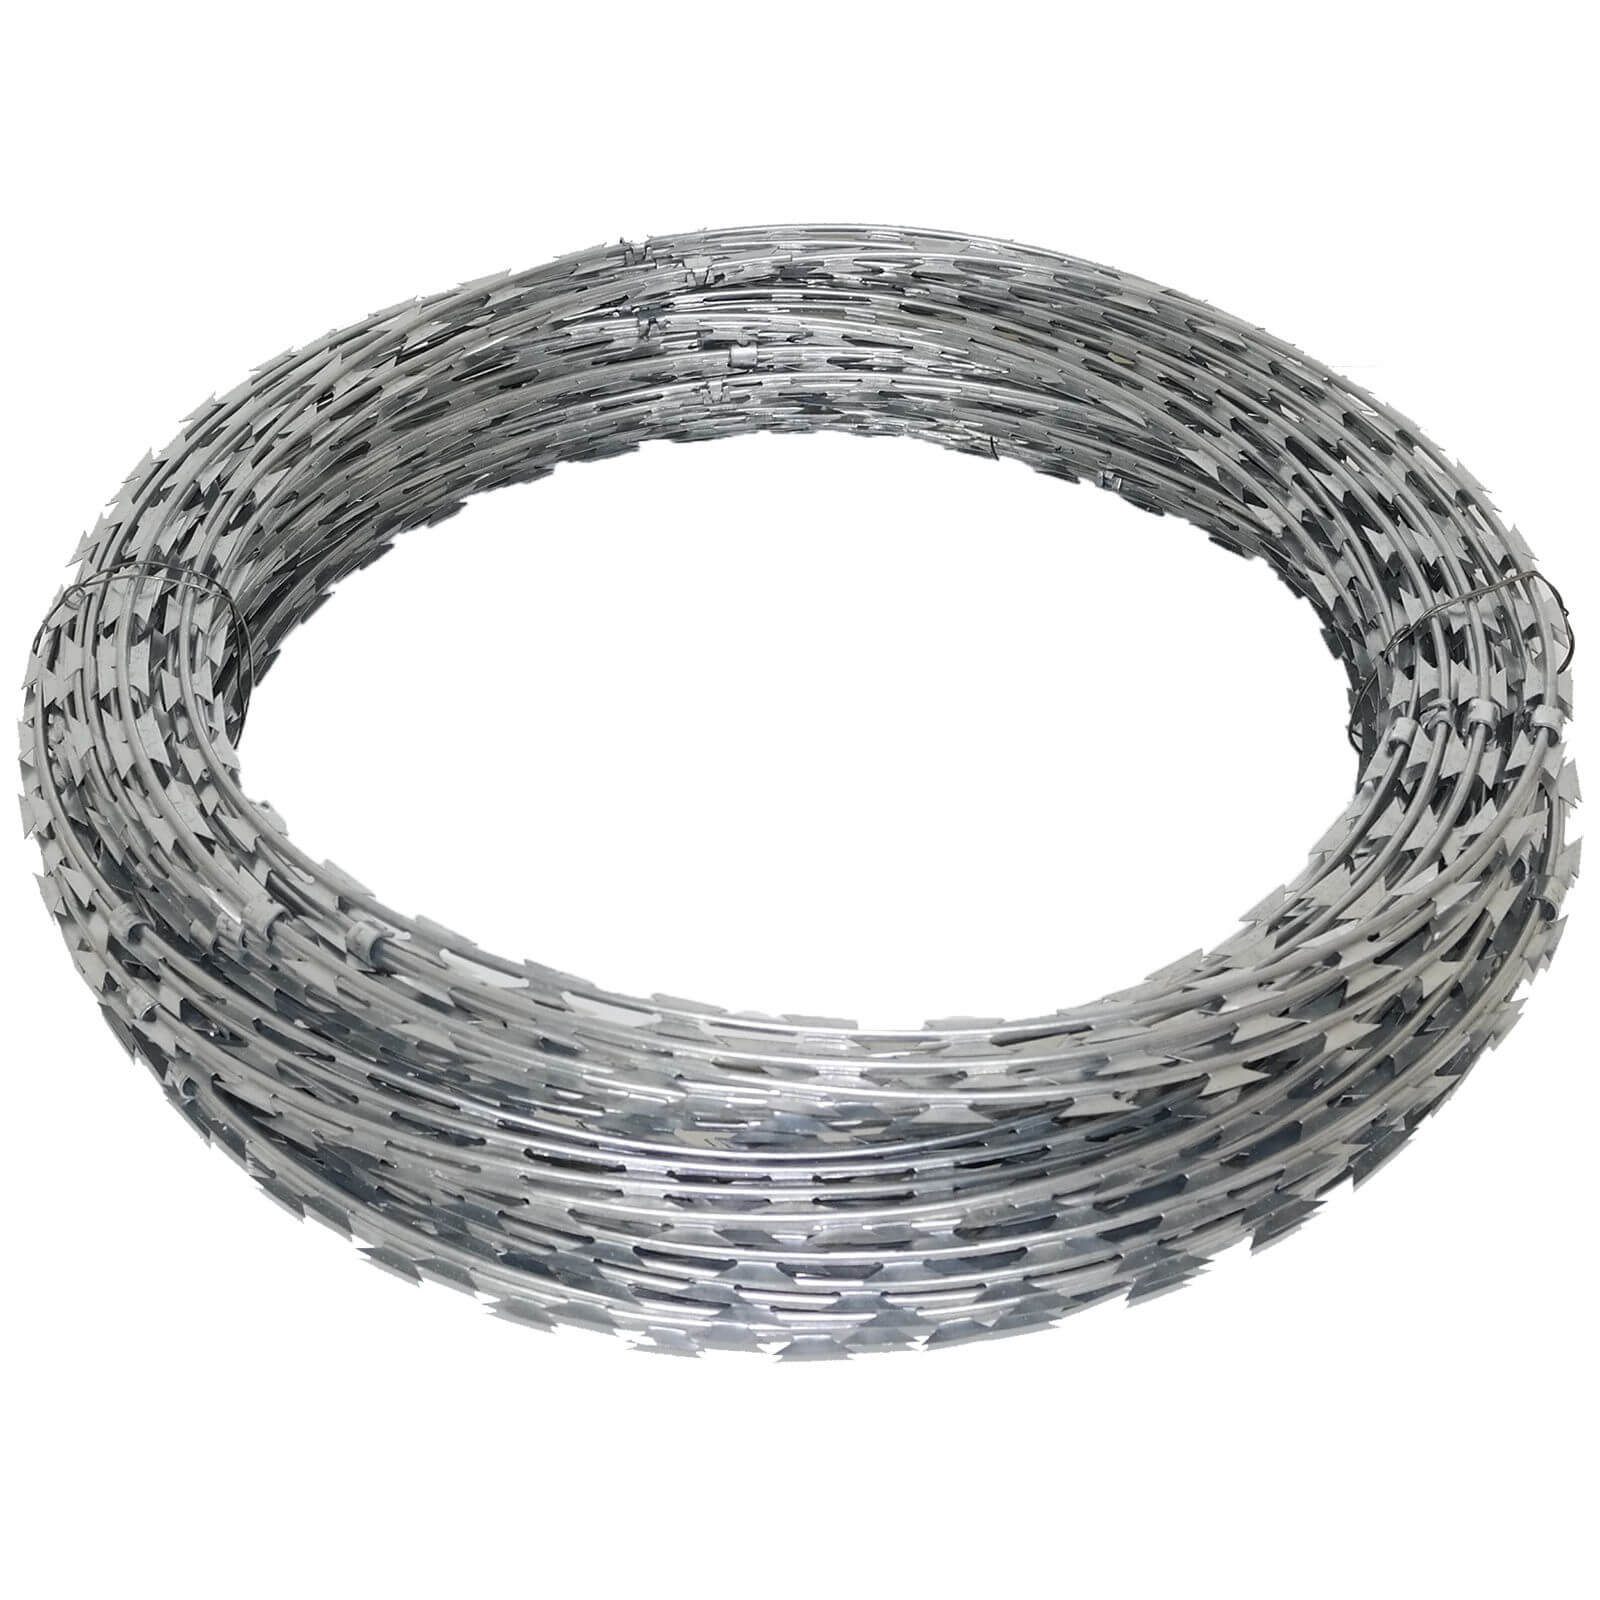 Enhance your security with razor wire fencing